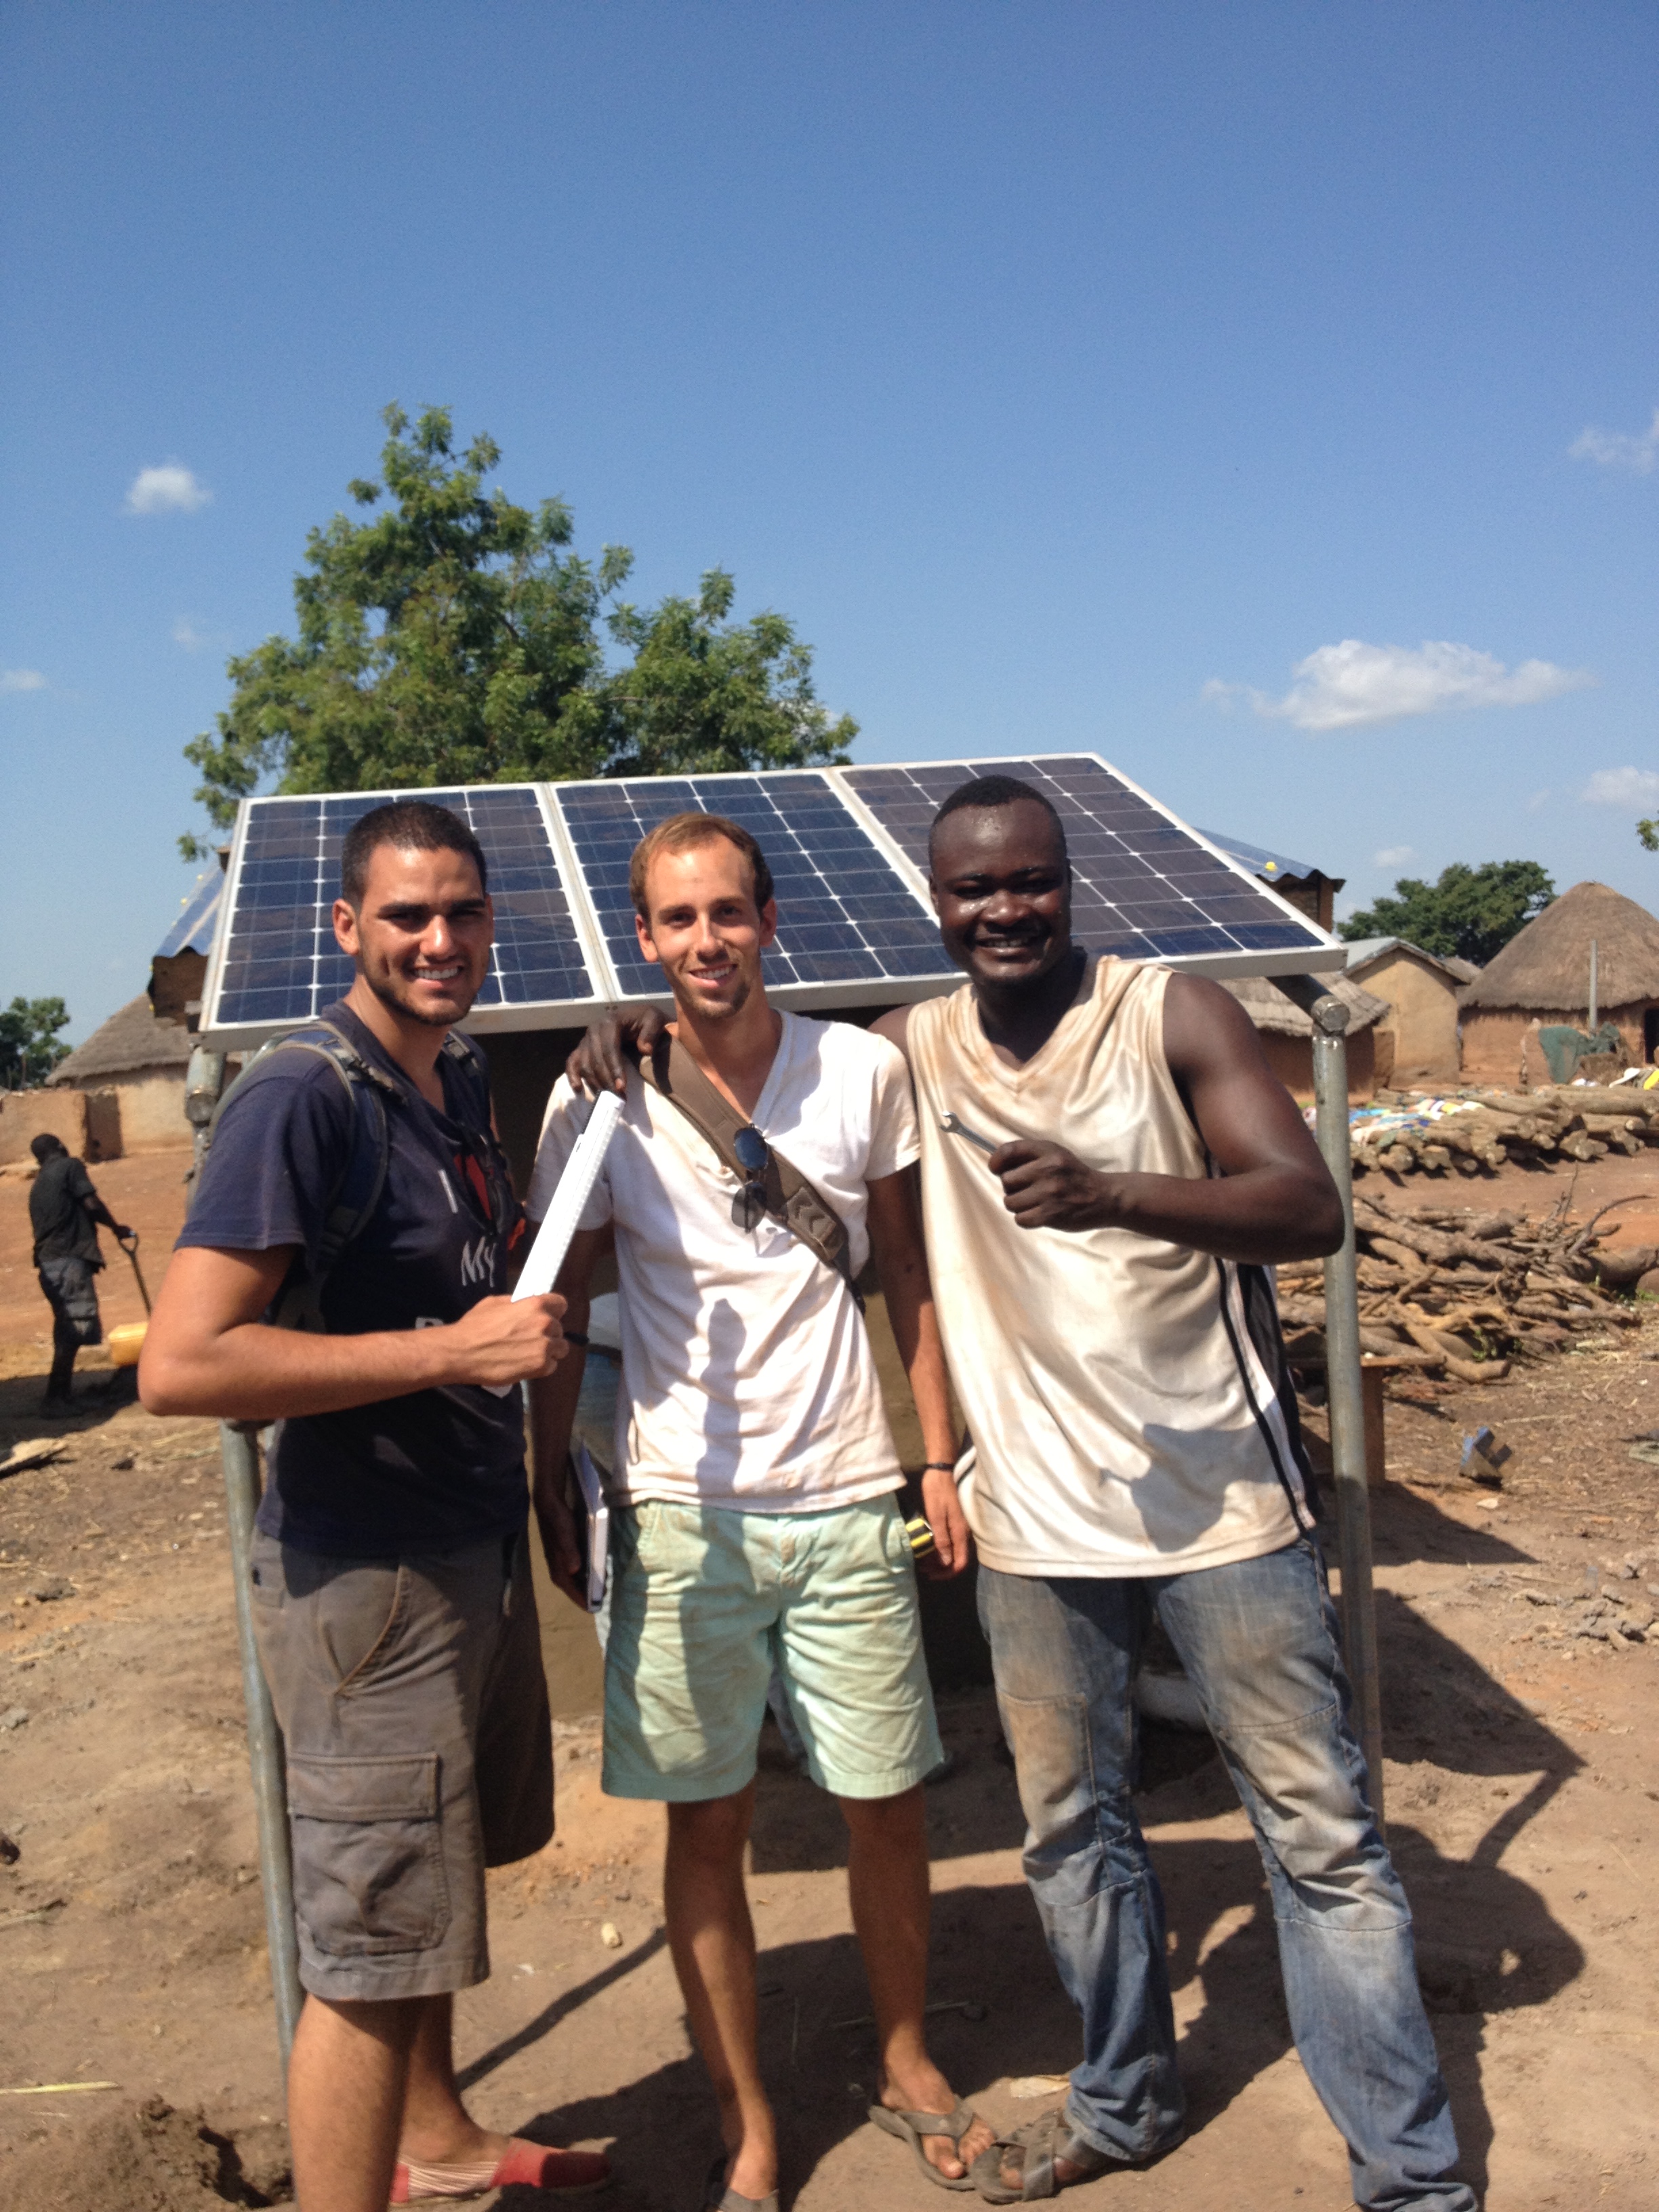 Mark, Ben, and Shak celebrating the completed solar panel installation.